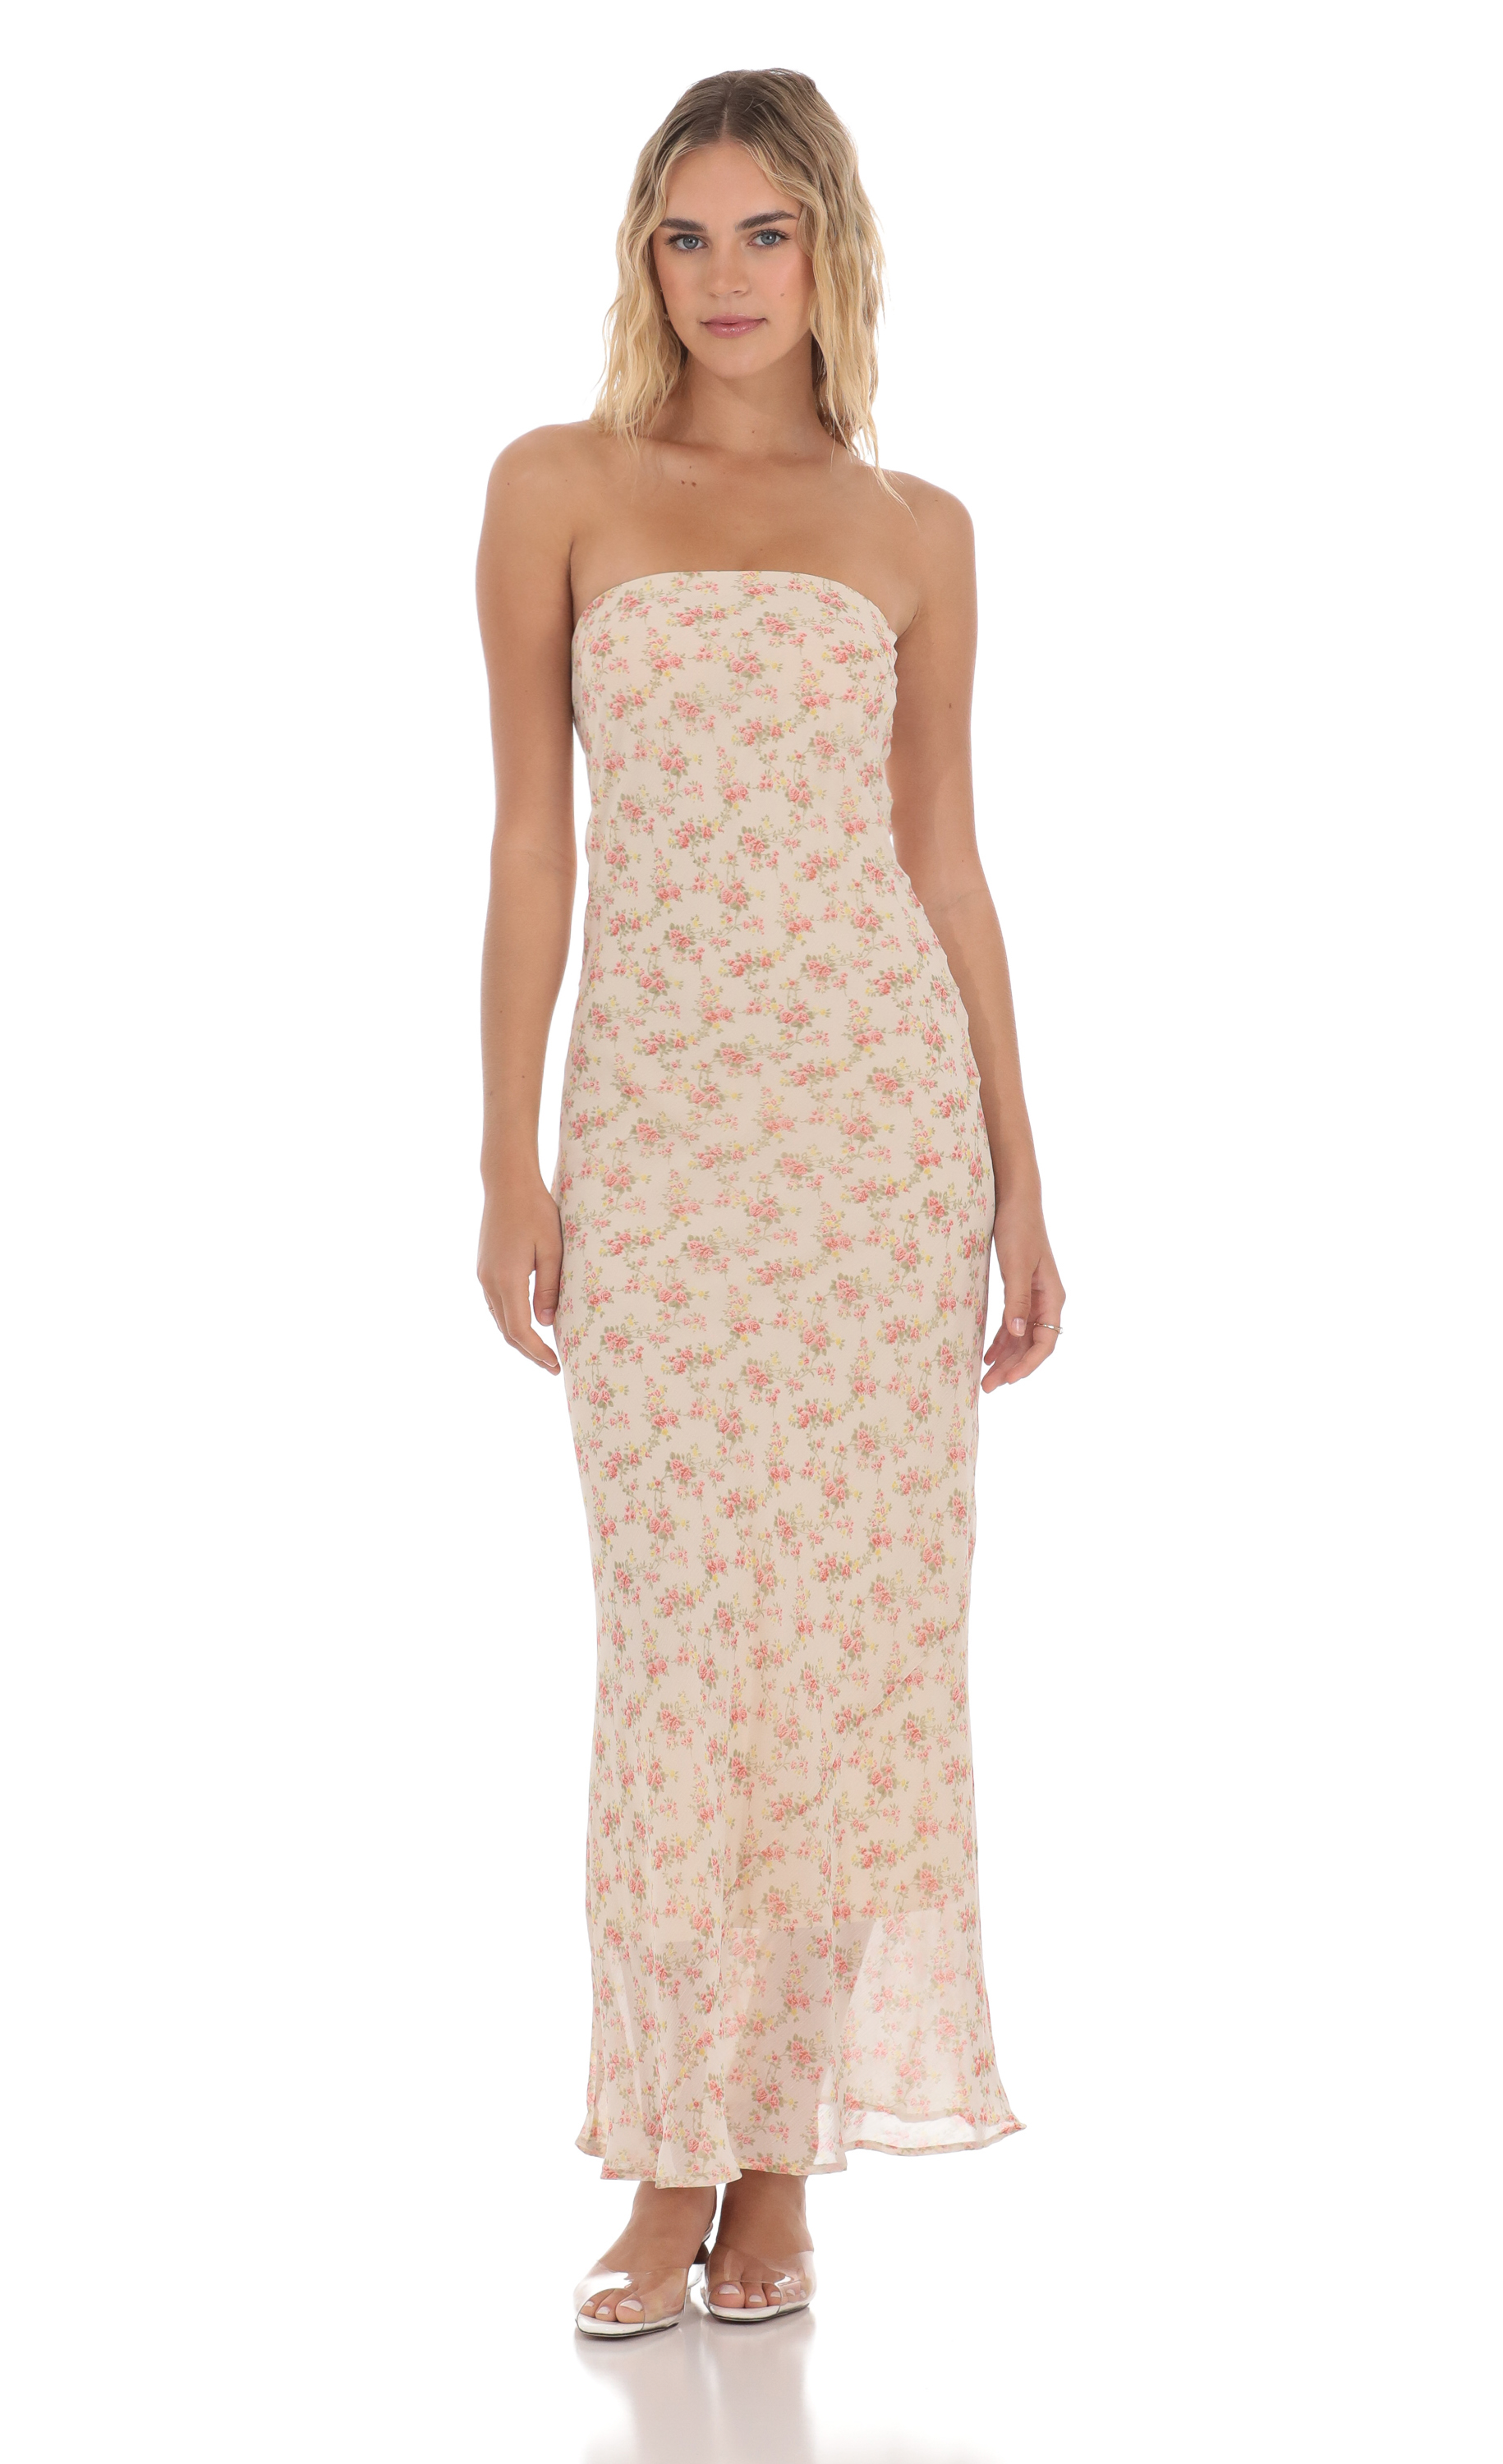 Strapless Floral Maxi Dress in Cream